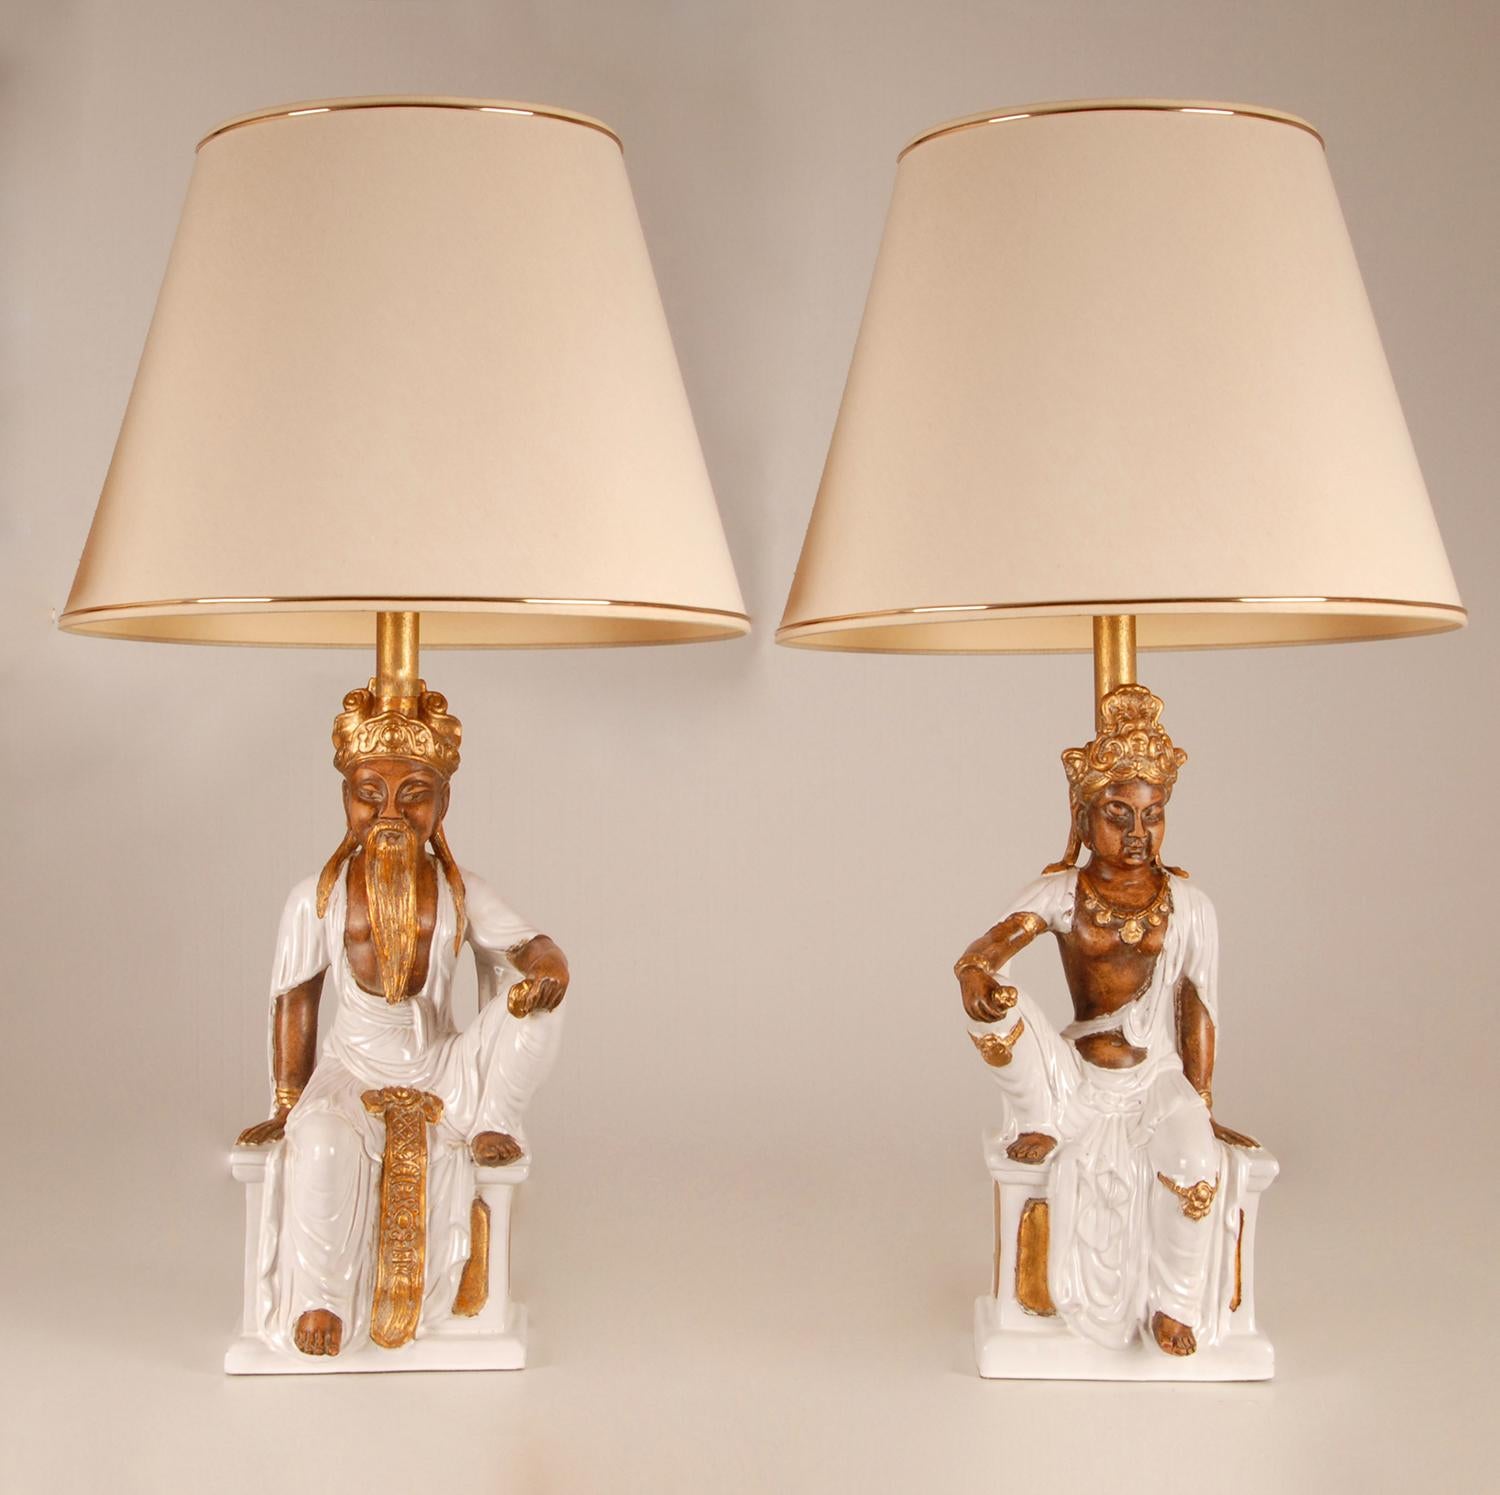 Vintage Ceramic Table Lamps Italian Chinoiserie Chinese Buddha figures Ceramic For Sale 5